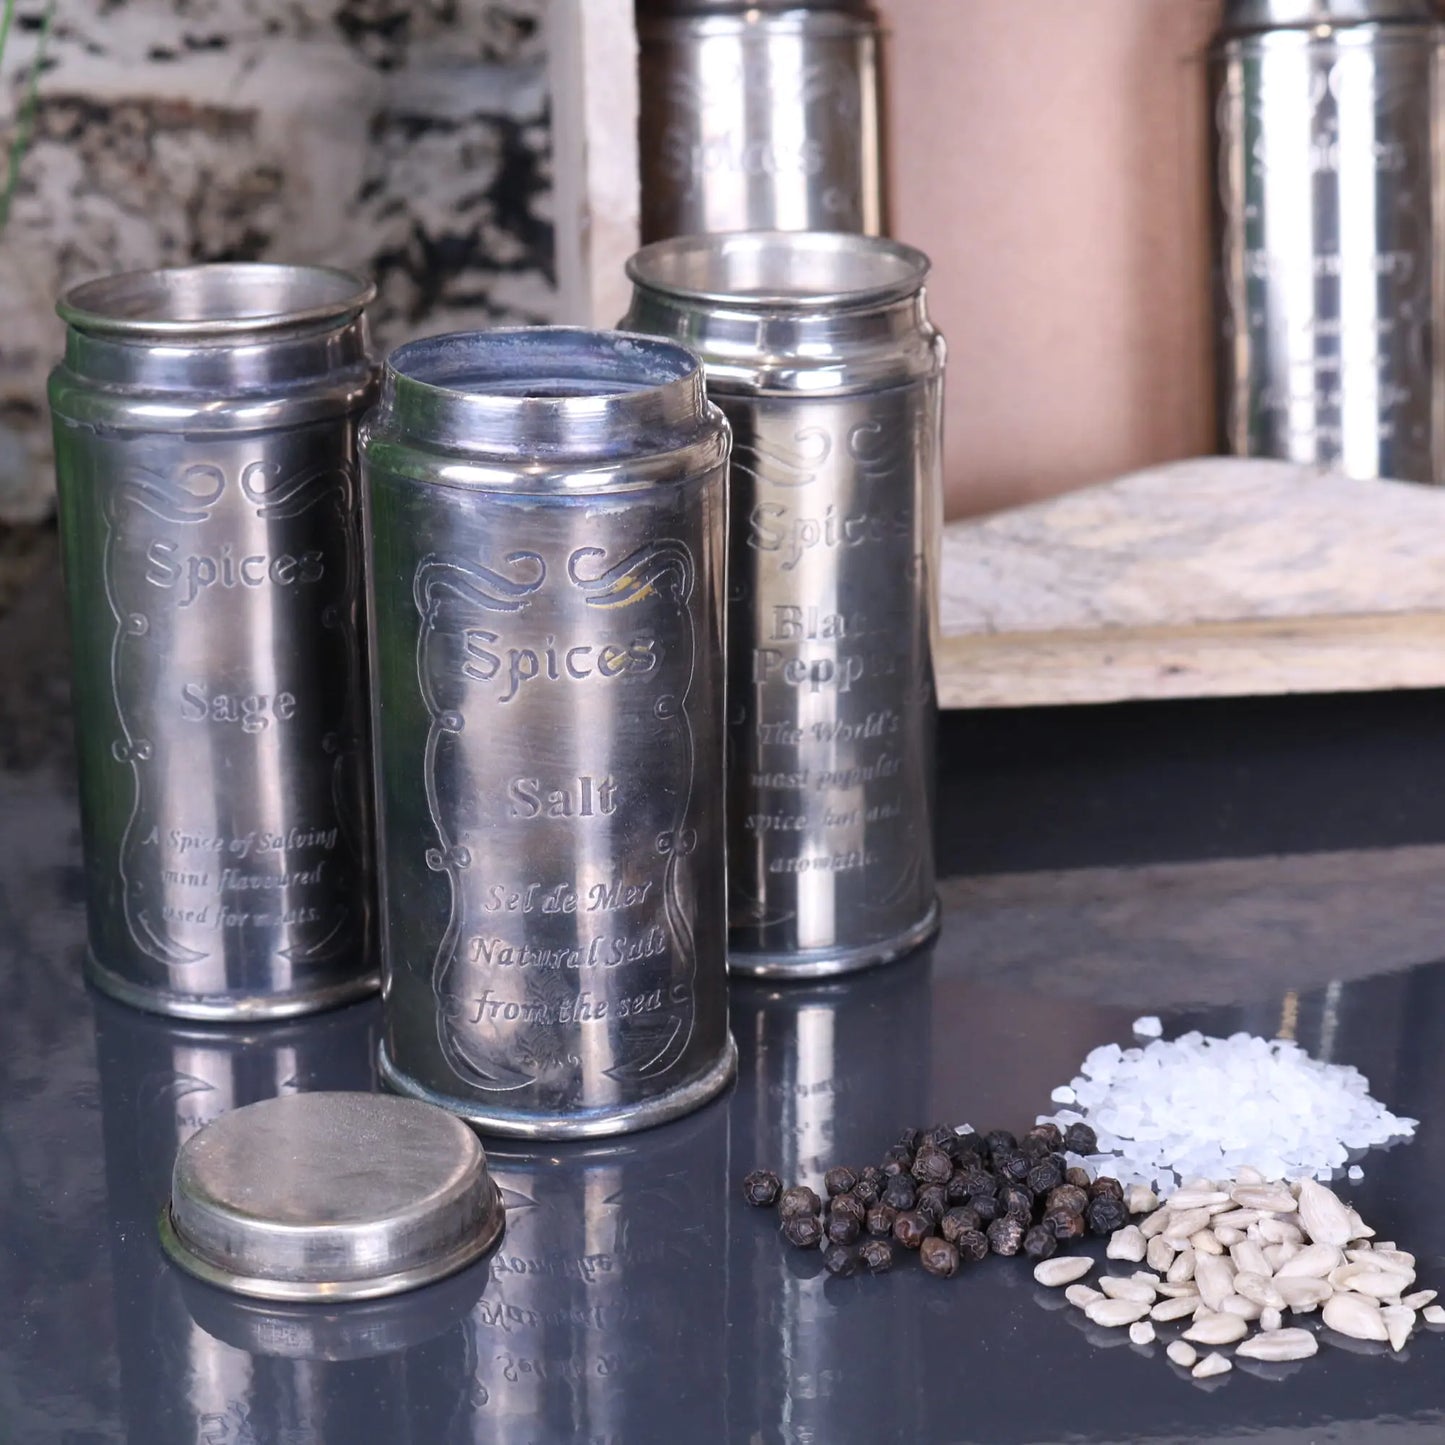 Namak Wooden Wall Mounted Spice Rack - Closeup of Canisters